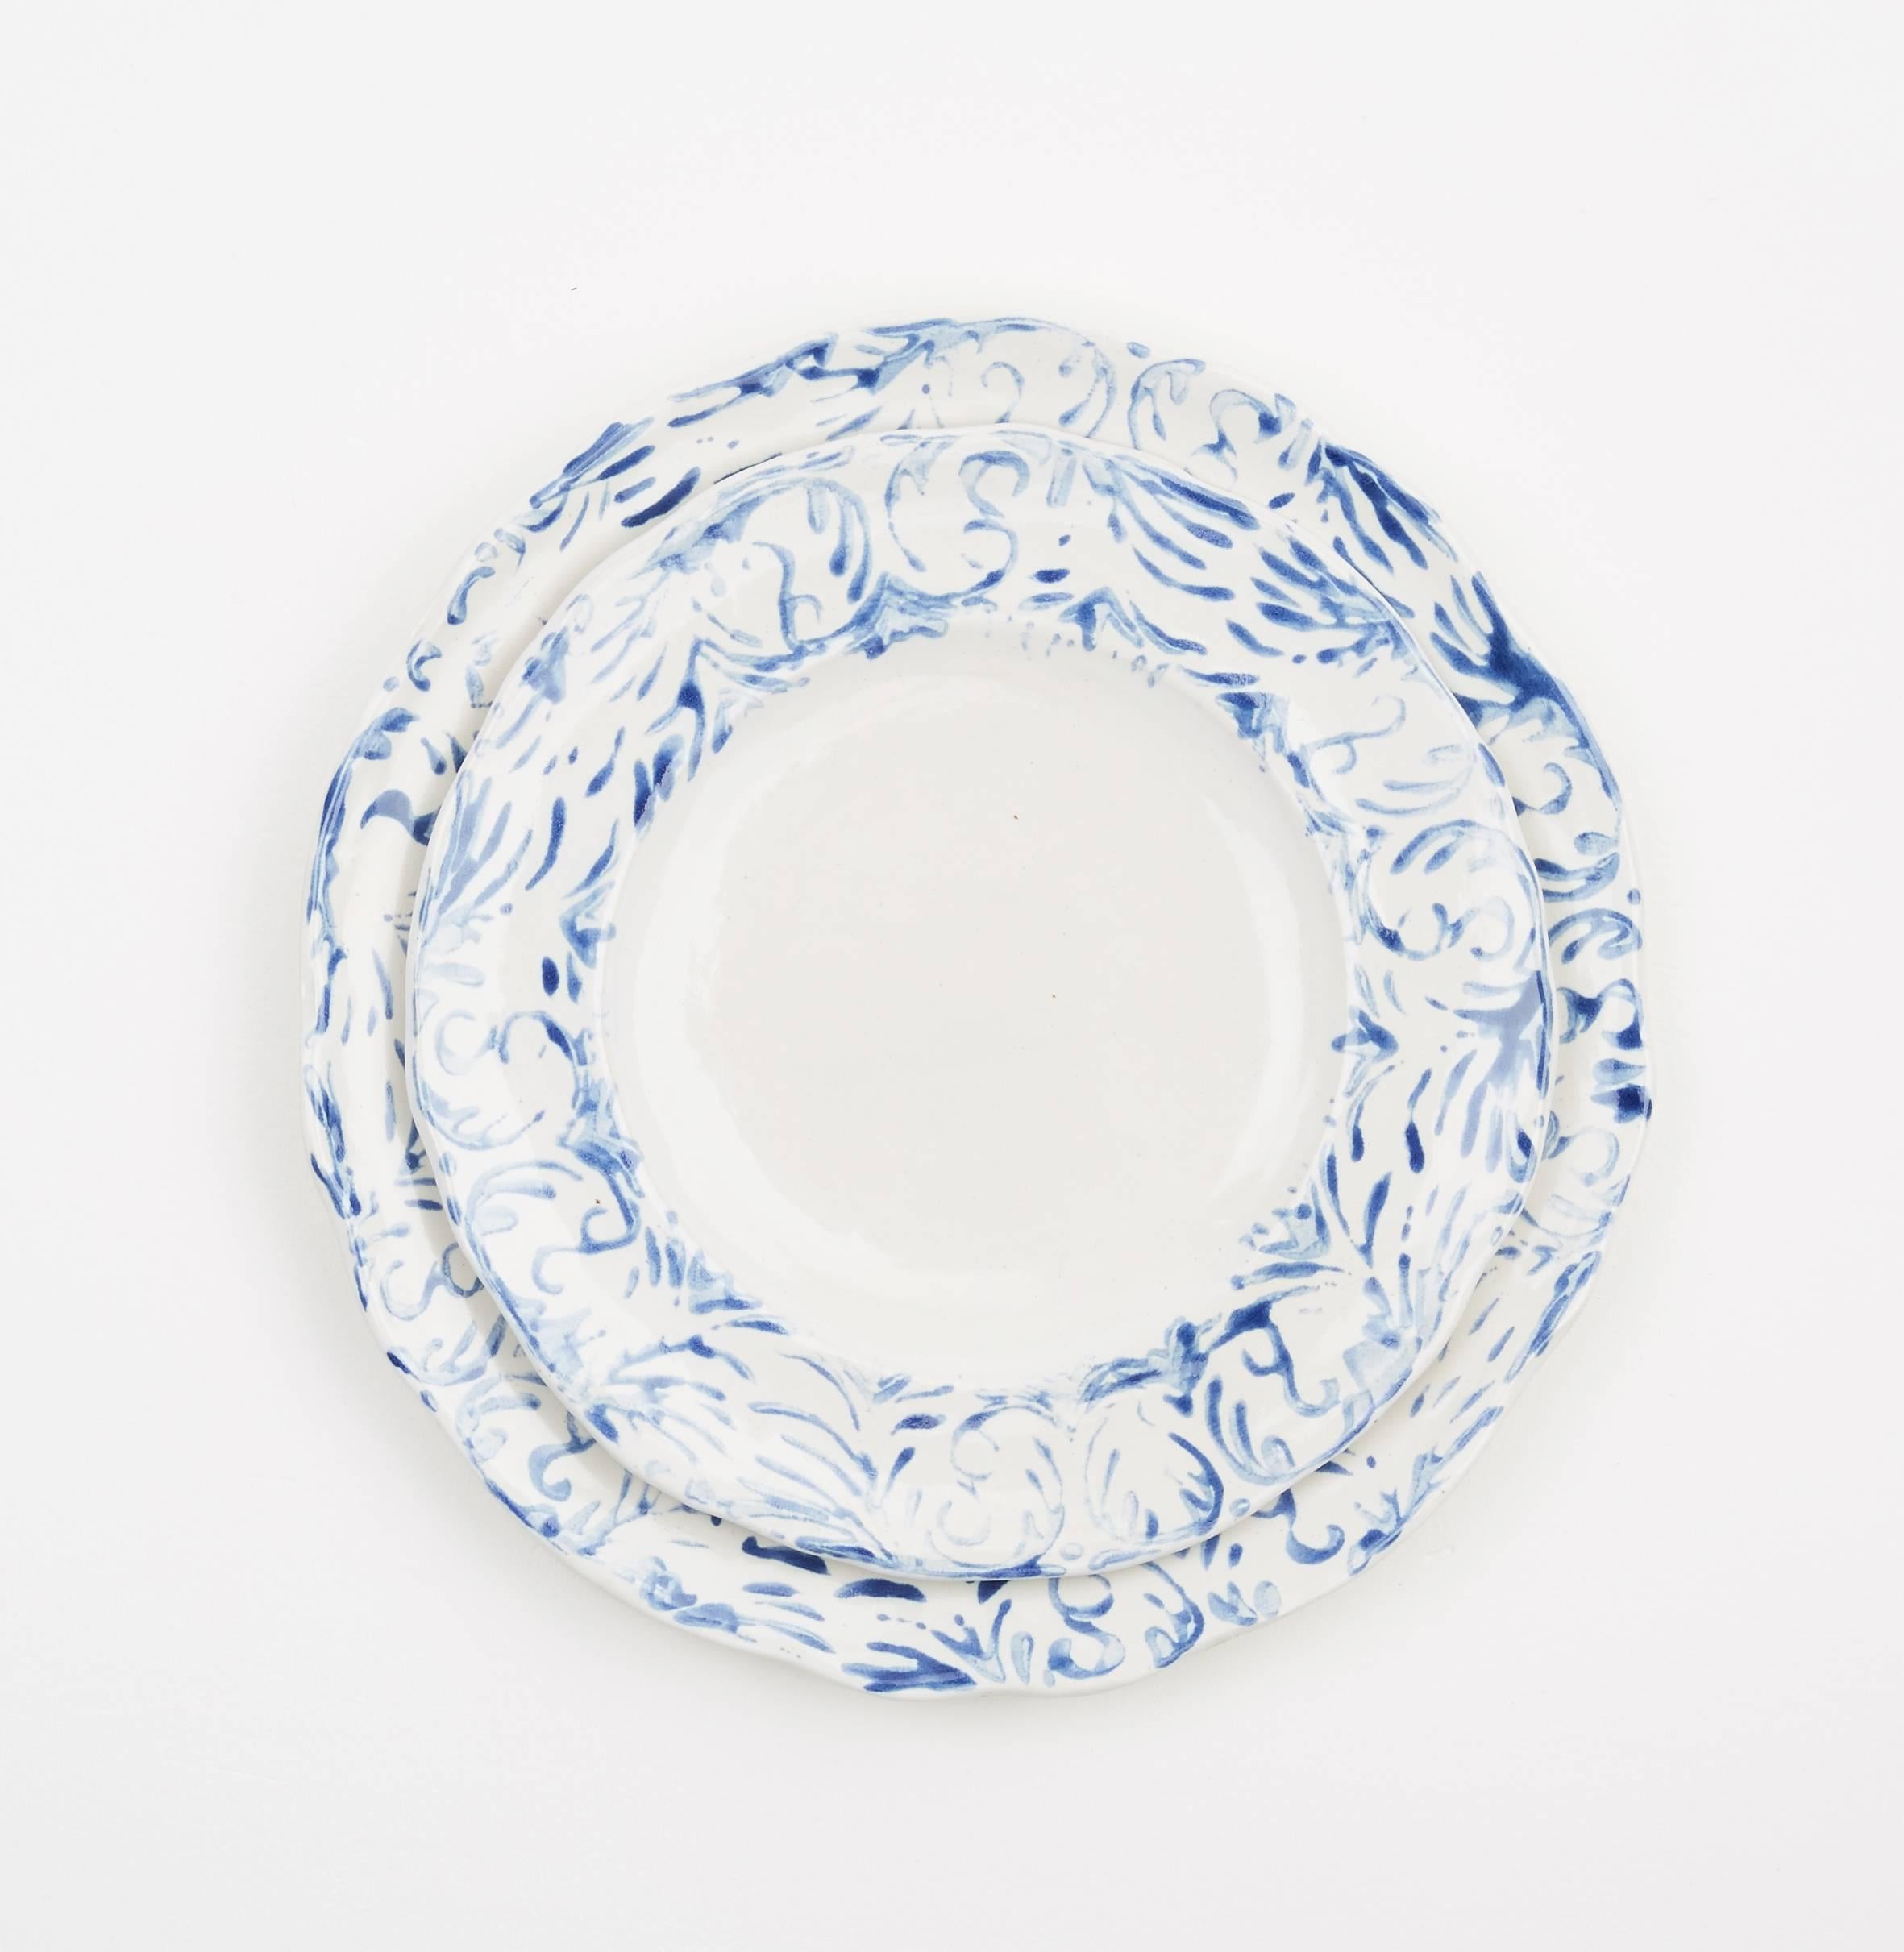 Hand Printed Blue and White Dessert Plates, Set of Four In Excellent Condition For Sale In Milano, Italy